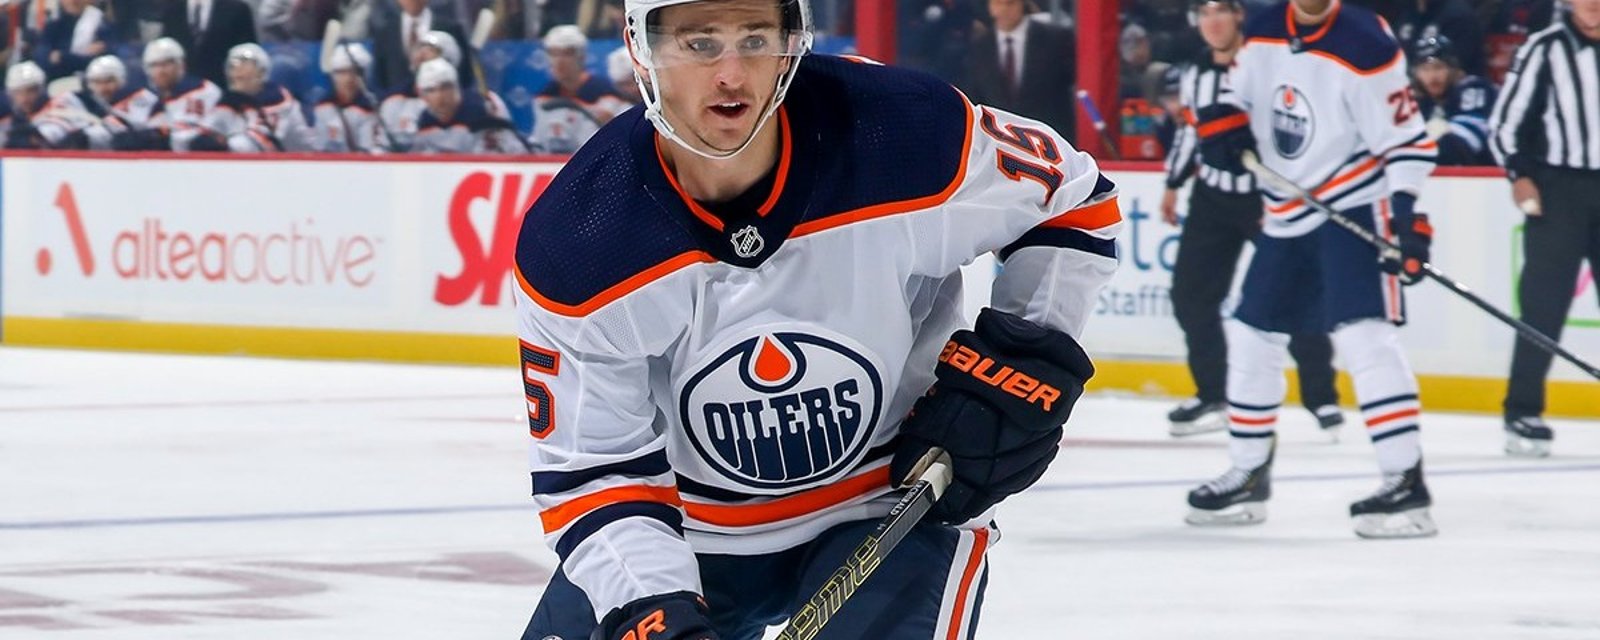 NHL Player Safety suspends Oilers forward Josh Archibald.